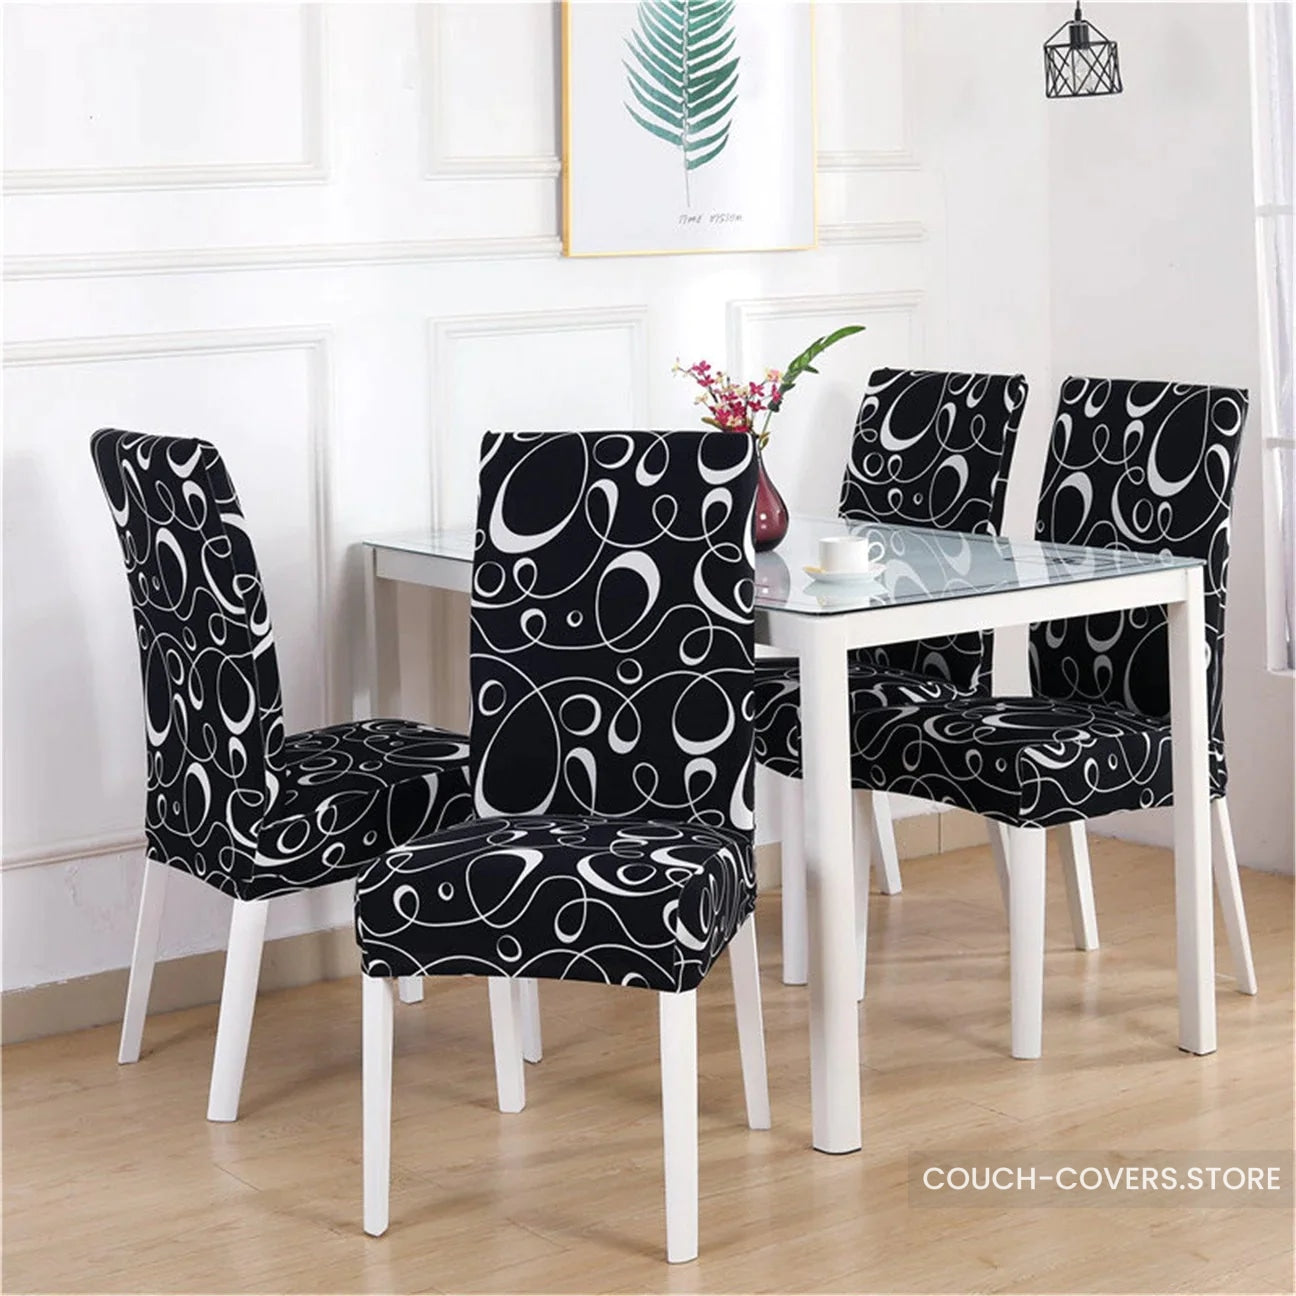 Black and White Chair Covers